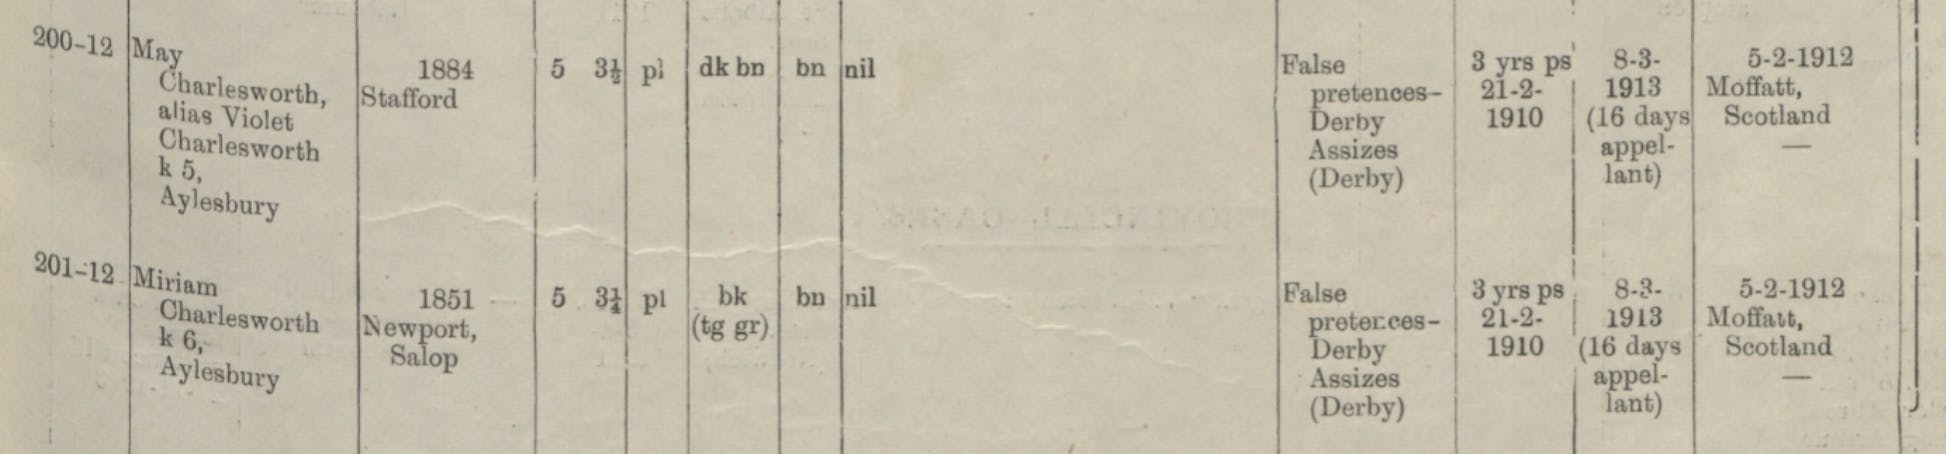 A further crime record, showing their release in 1912 to Moffat, Scotland.